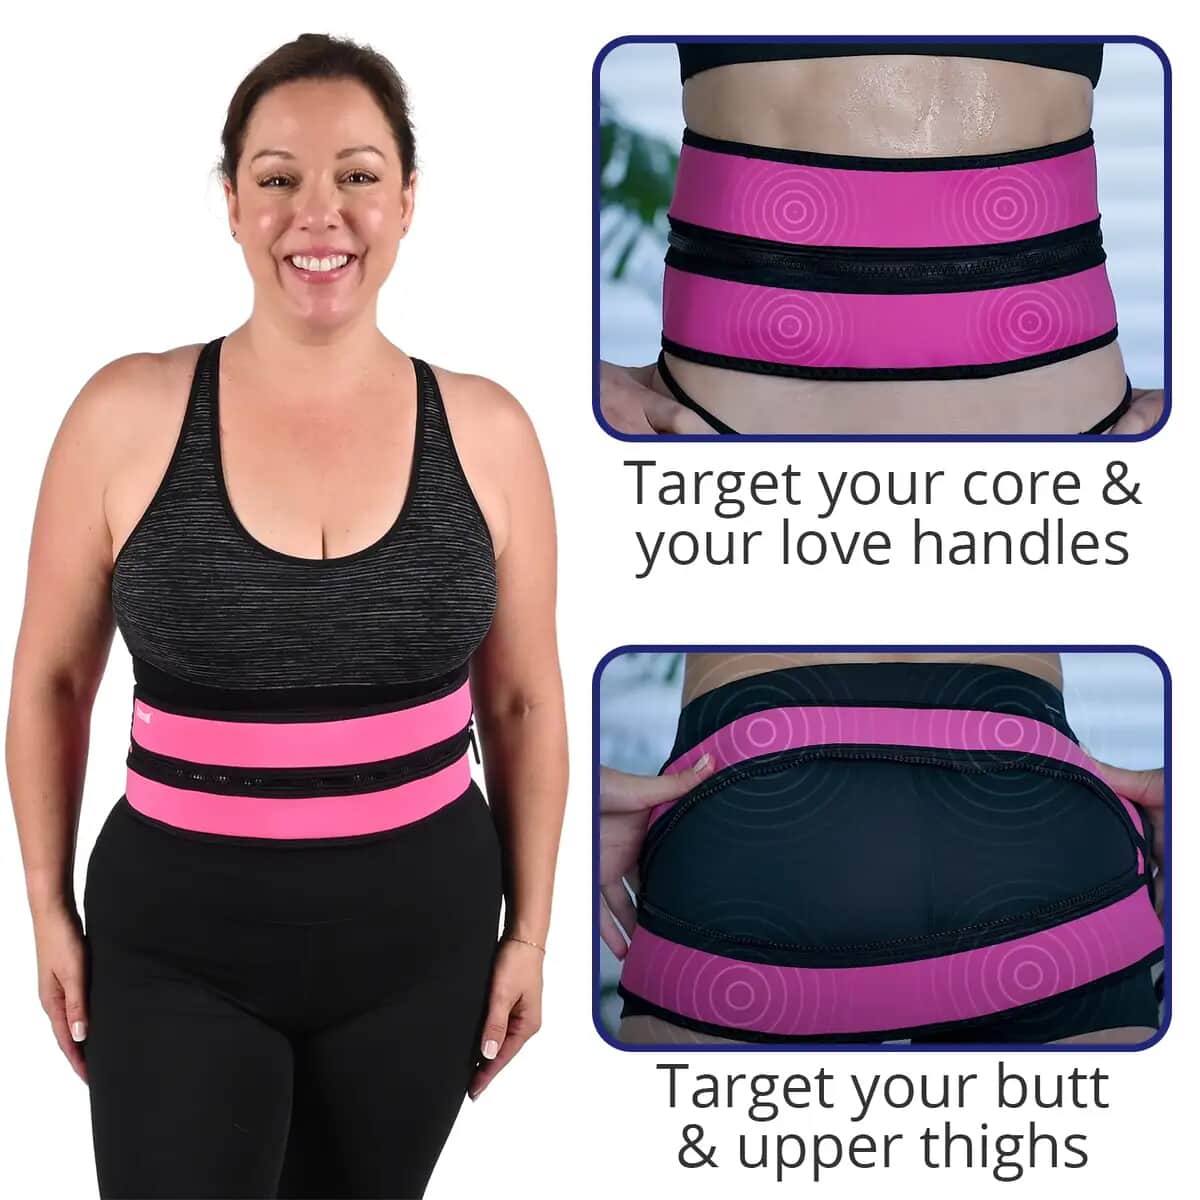 EVERTONE Zip & Tone Womens Belt to Lift and Firm Abs and Butt , Toning Slimming Belt , Weight Loss Belt , Waist Trimmer Belt image number 1